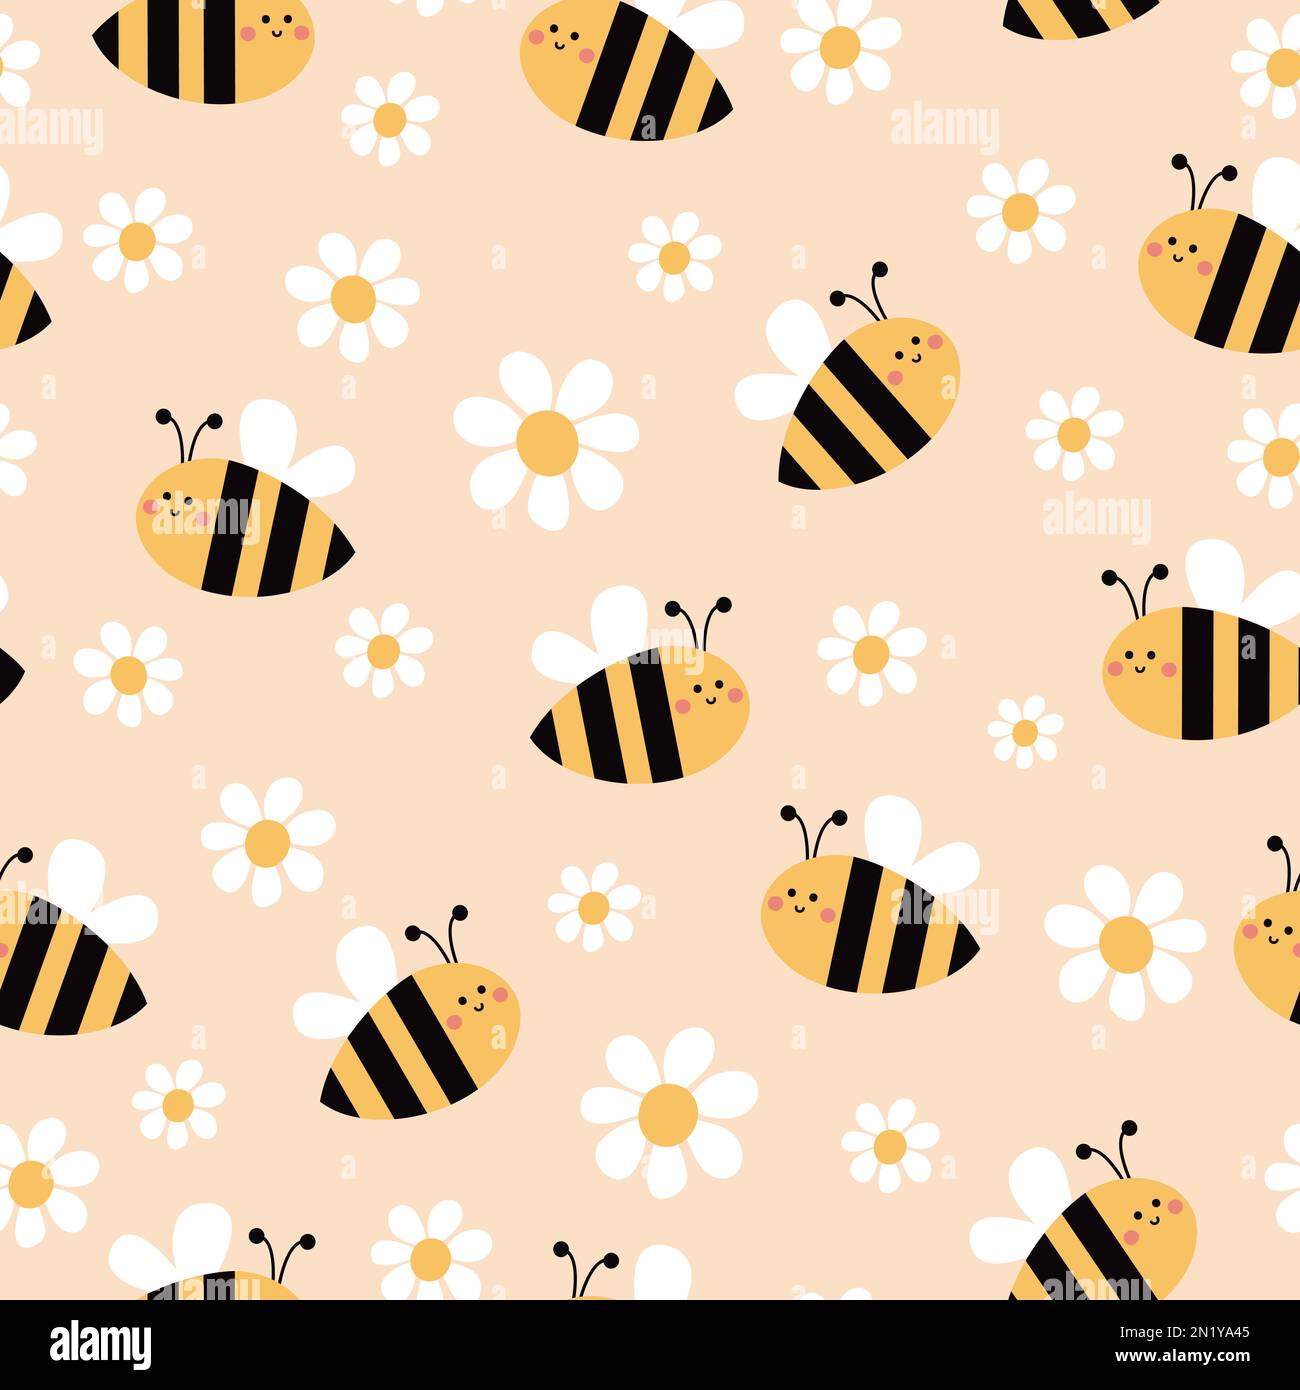 Cute seamless pattern with bees and daisies. Childish texture. Stock Photo